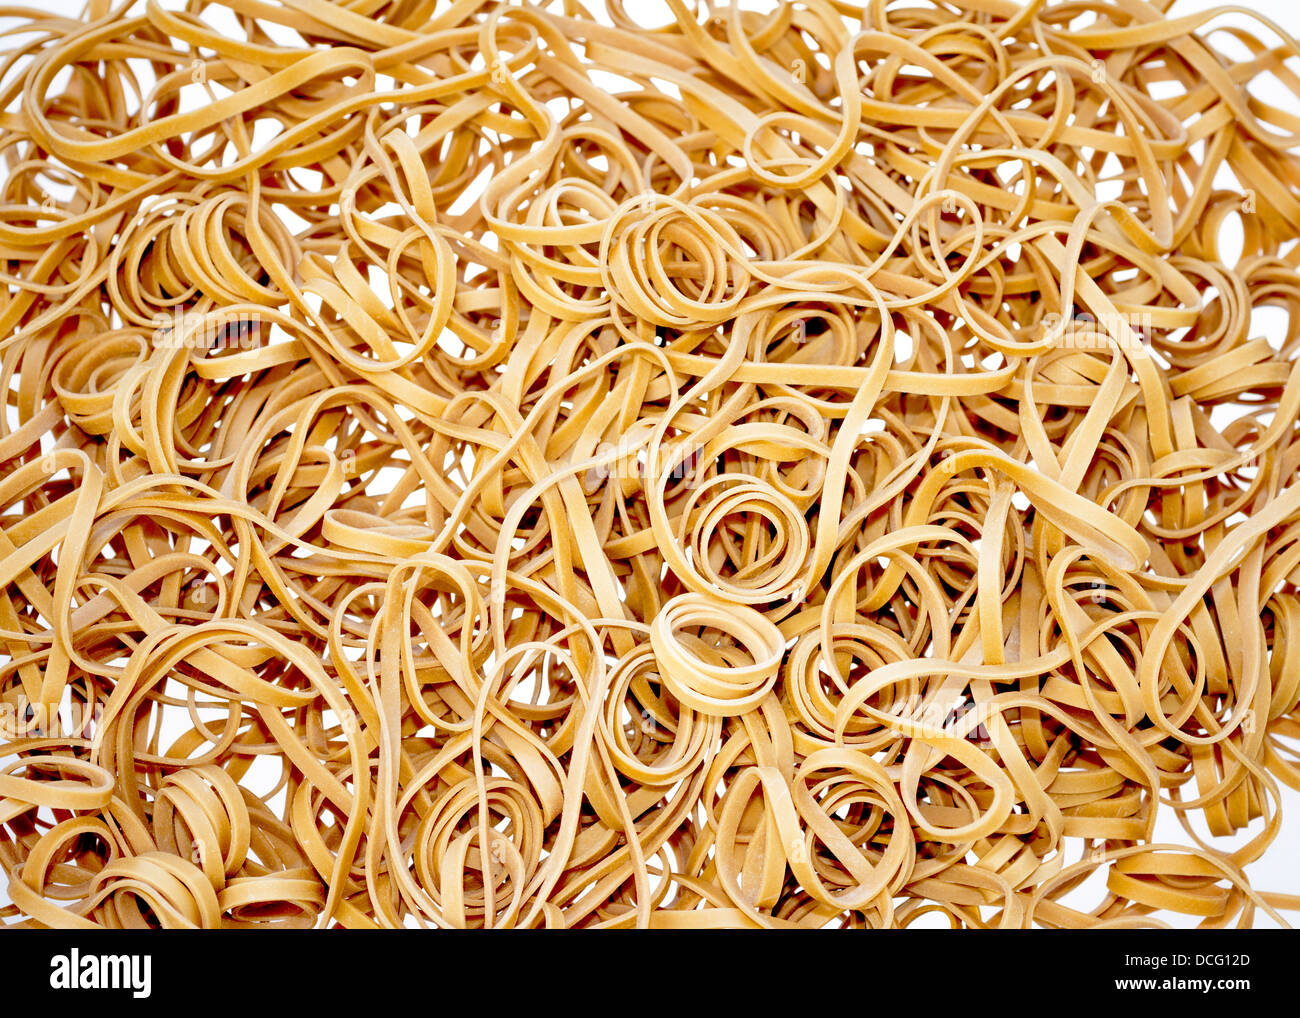 Curls of elastic rubber bands thrown together Stock Photo